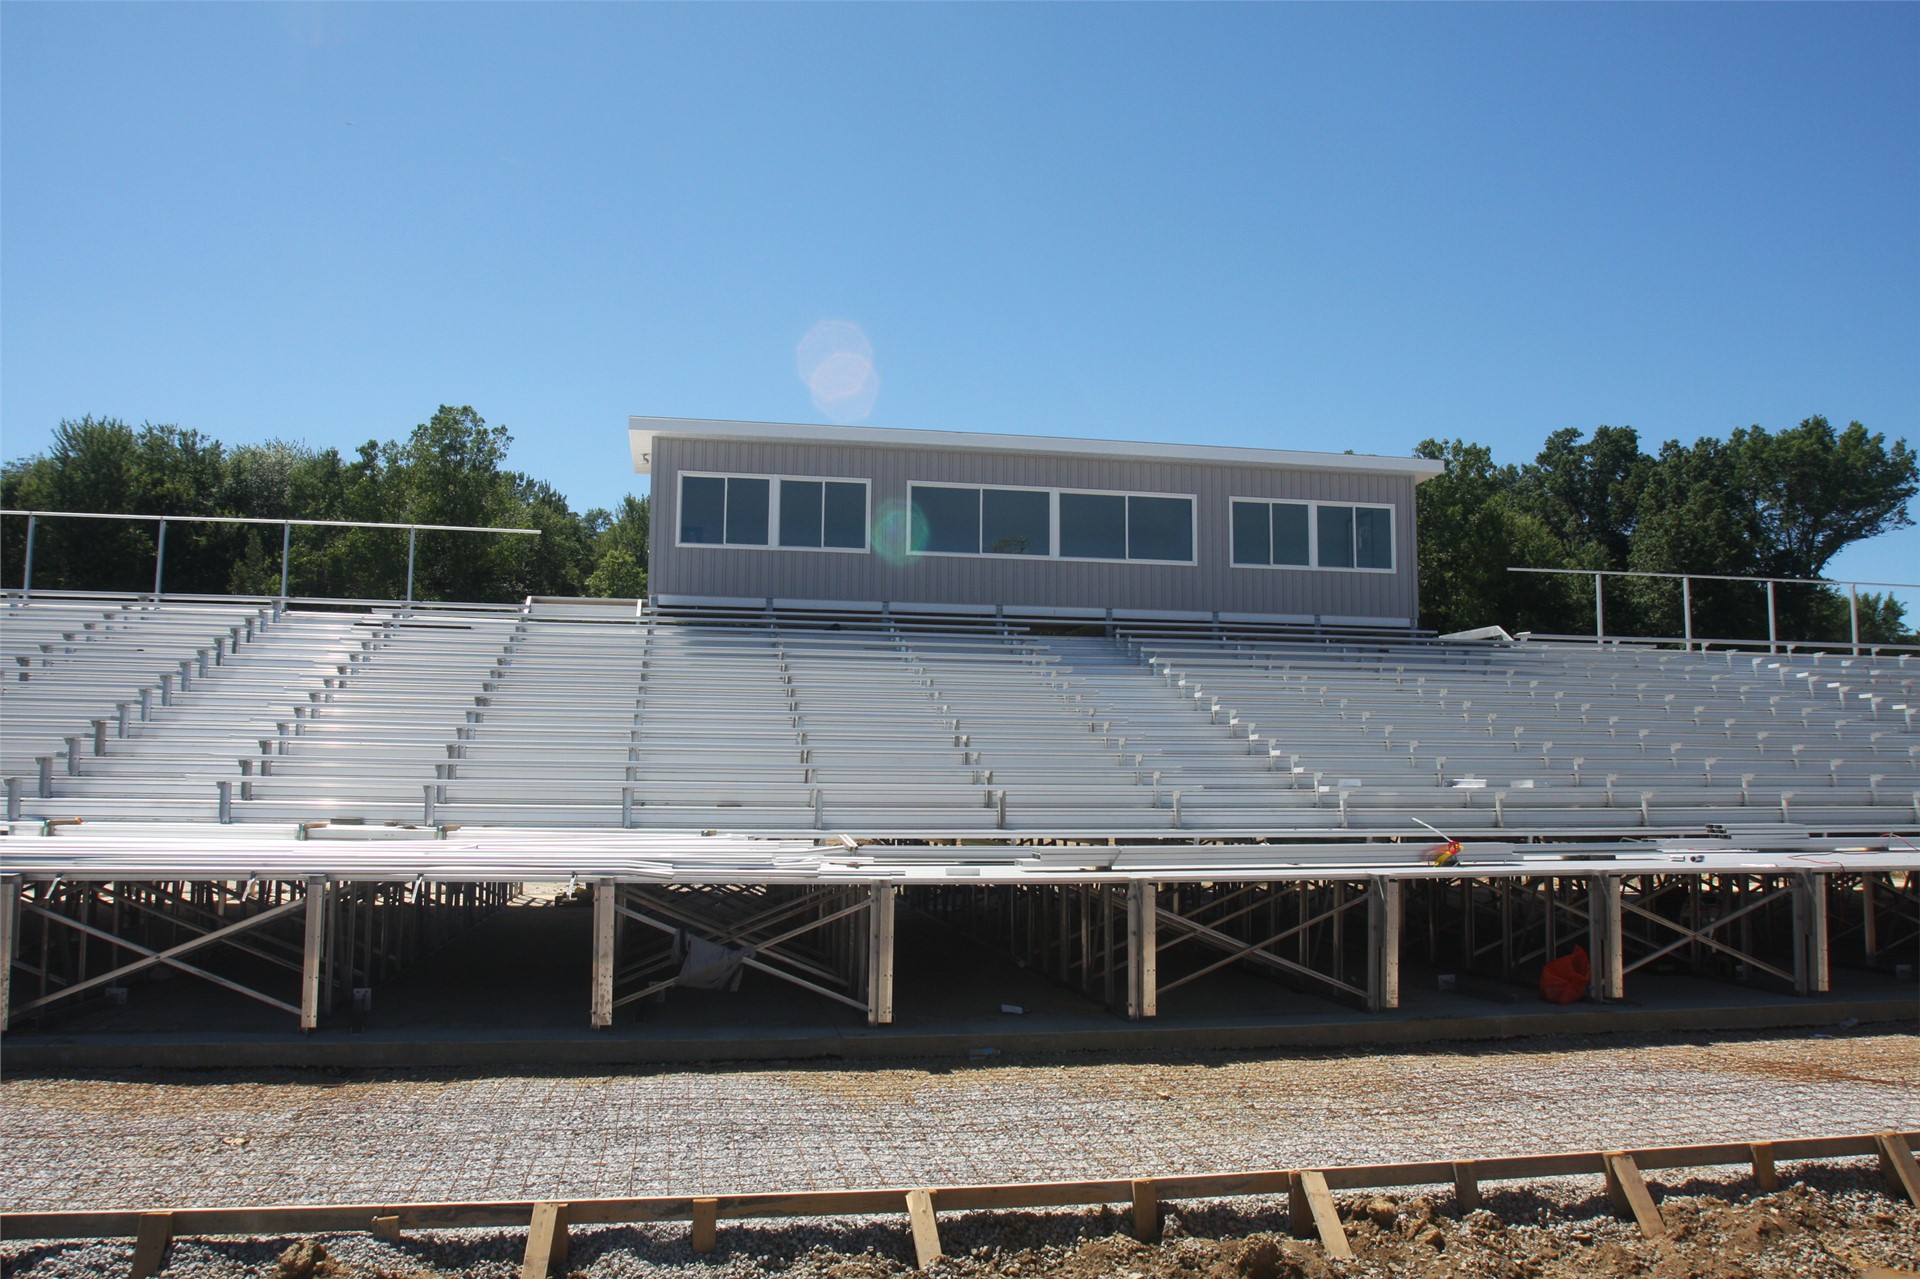 Press box from track level